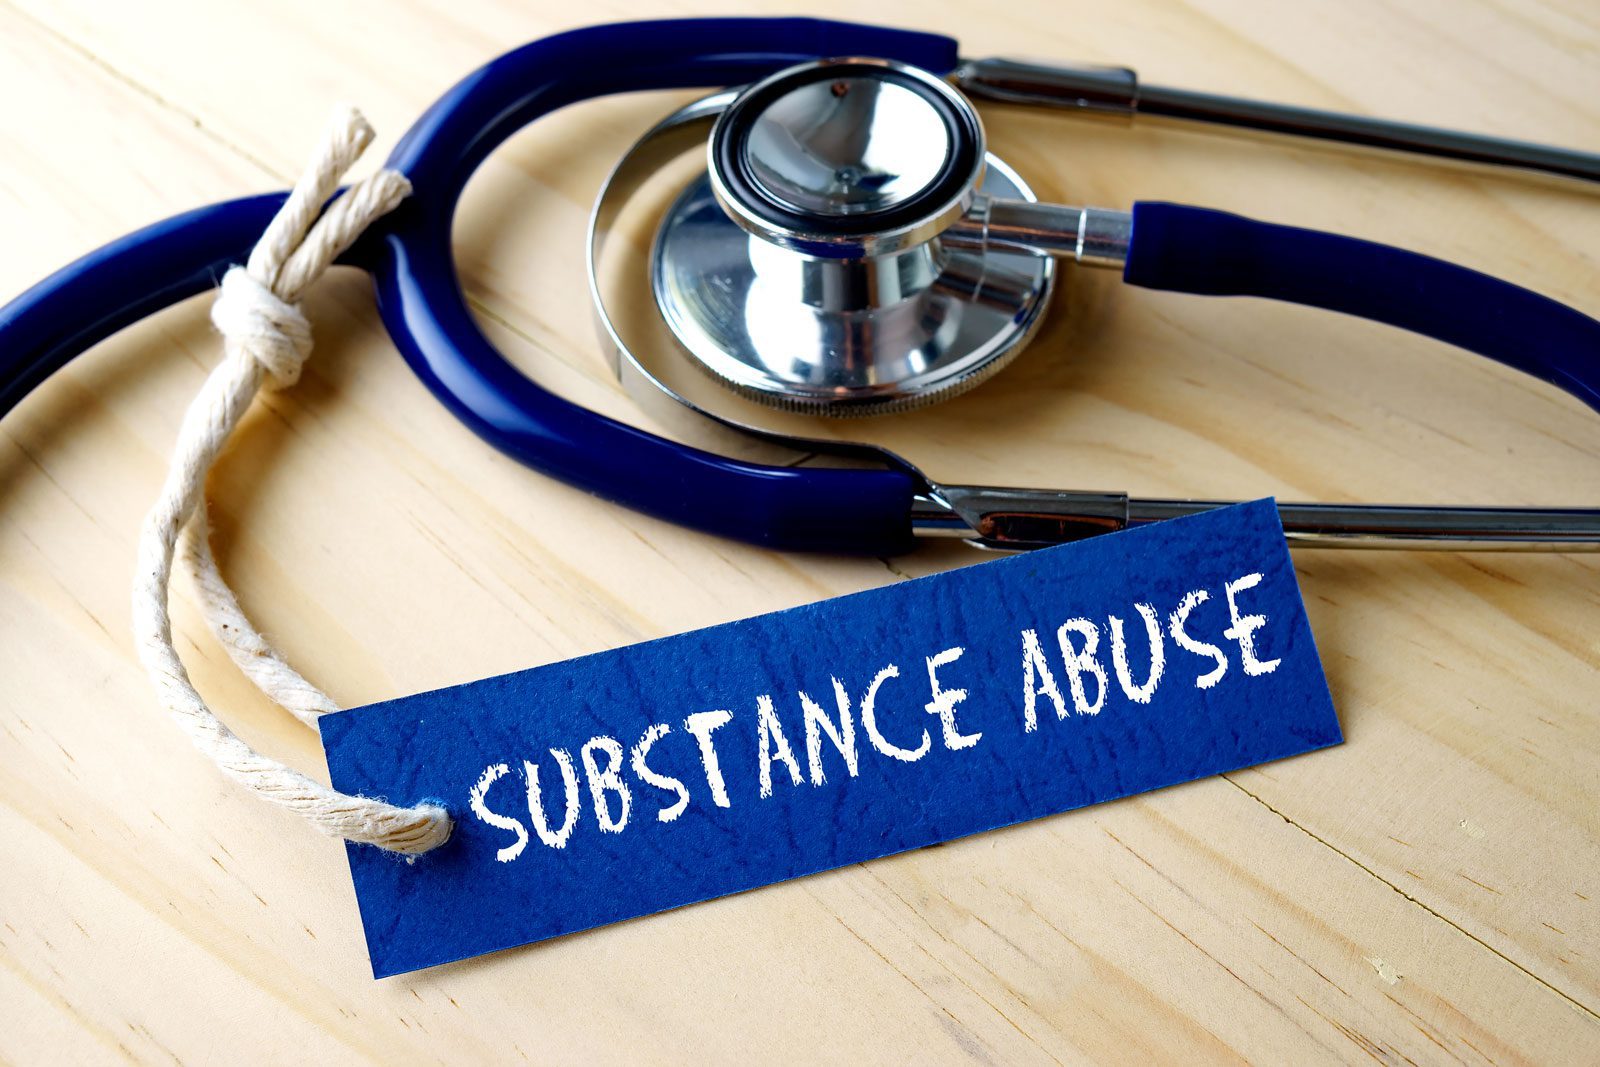 Where can I find the best substance abuse treatment centers orlando?